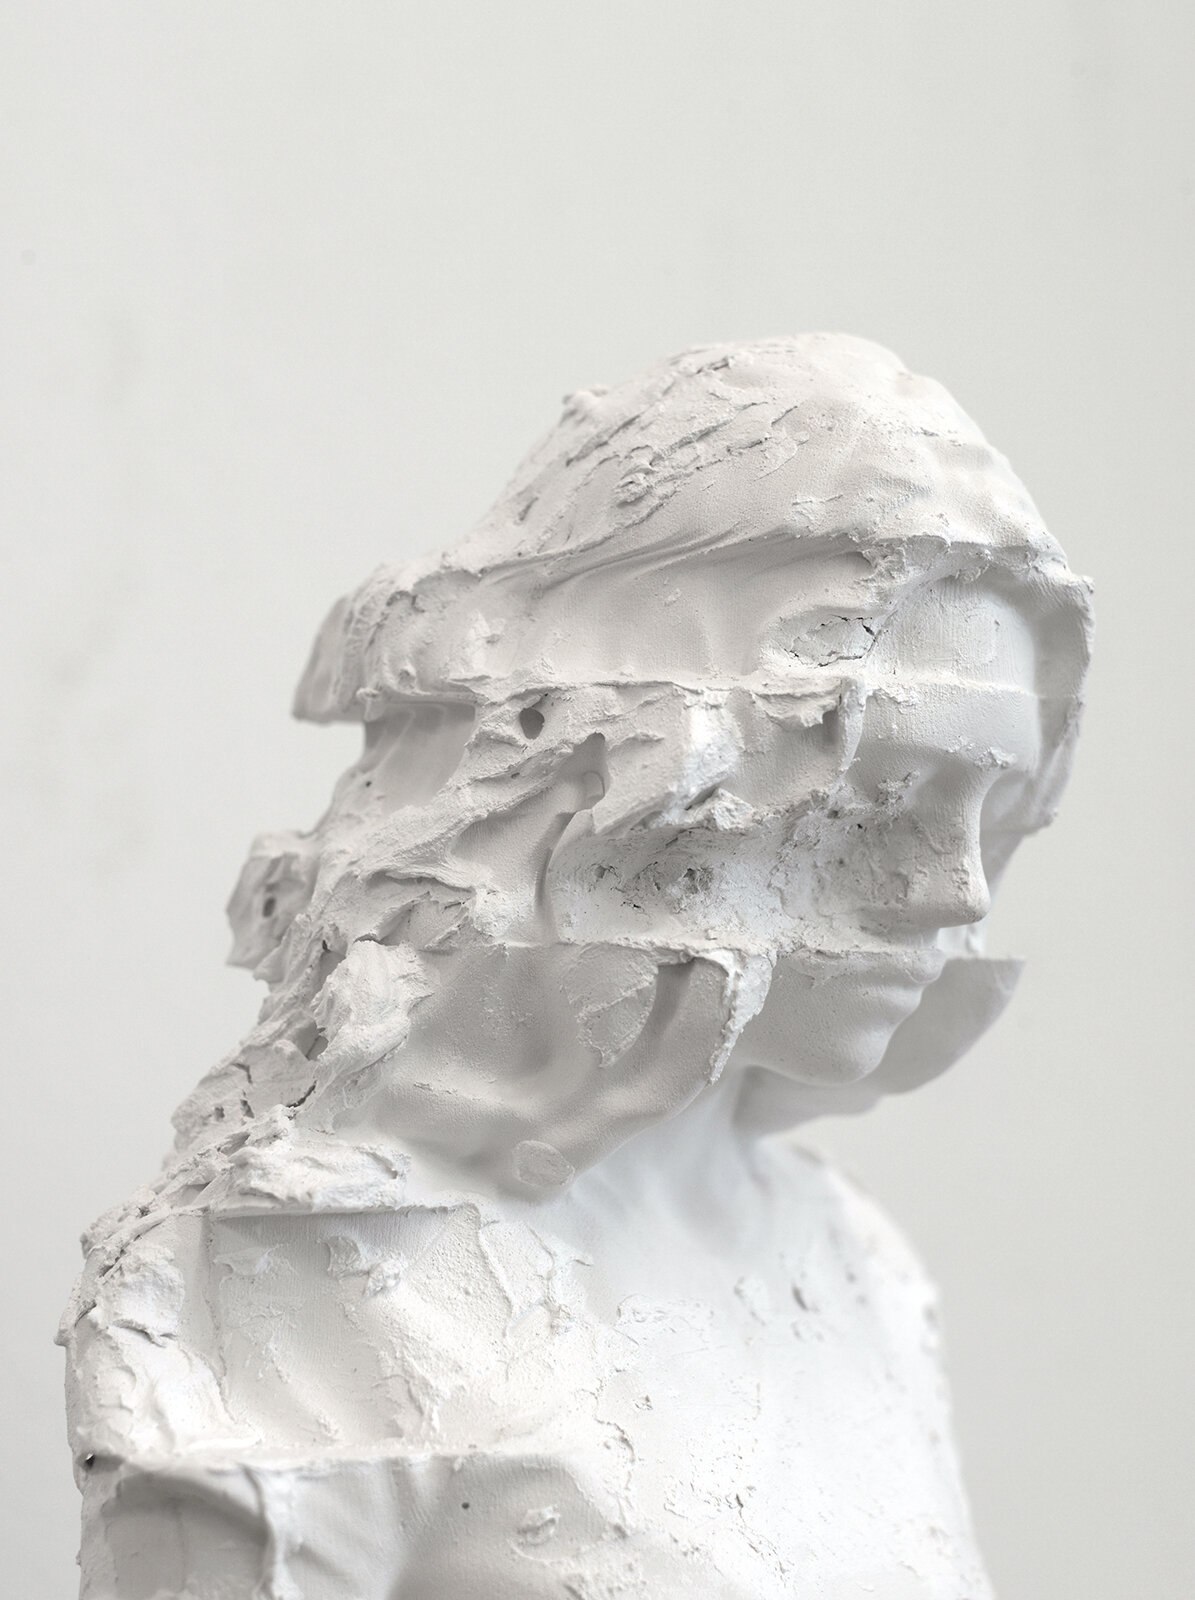   Bust I , 2014 Plaster, Edition 1, 28 x 24 x 26 cm Private collection 